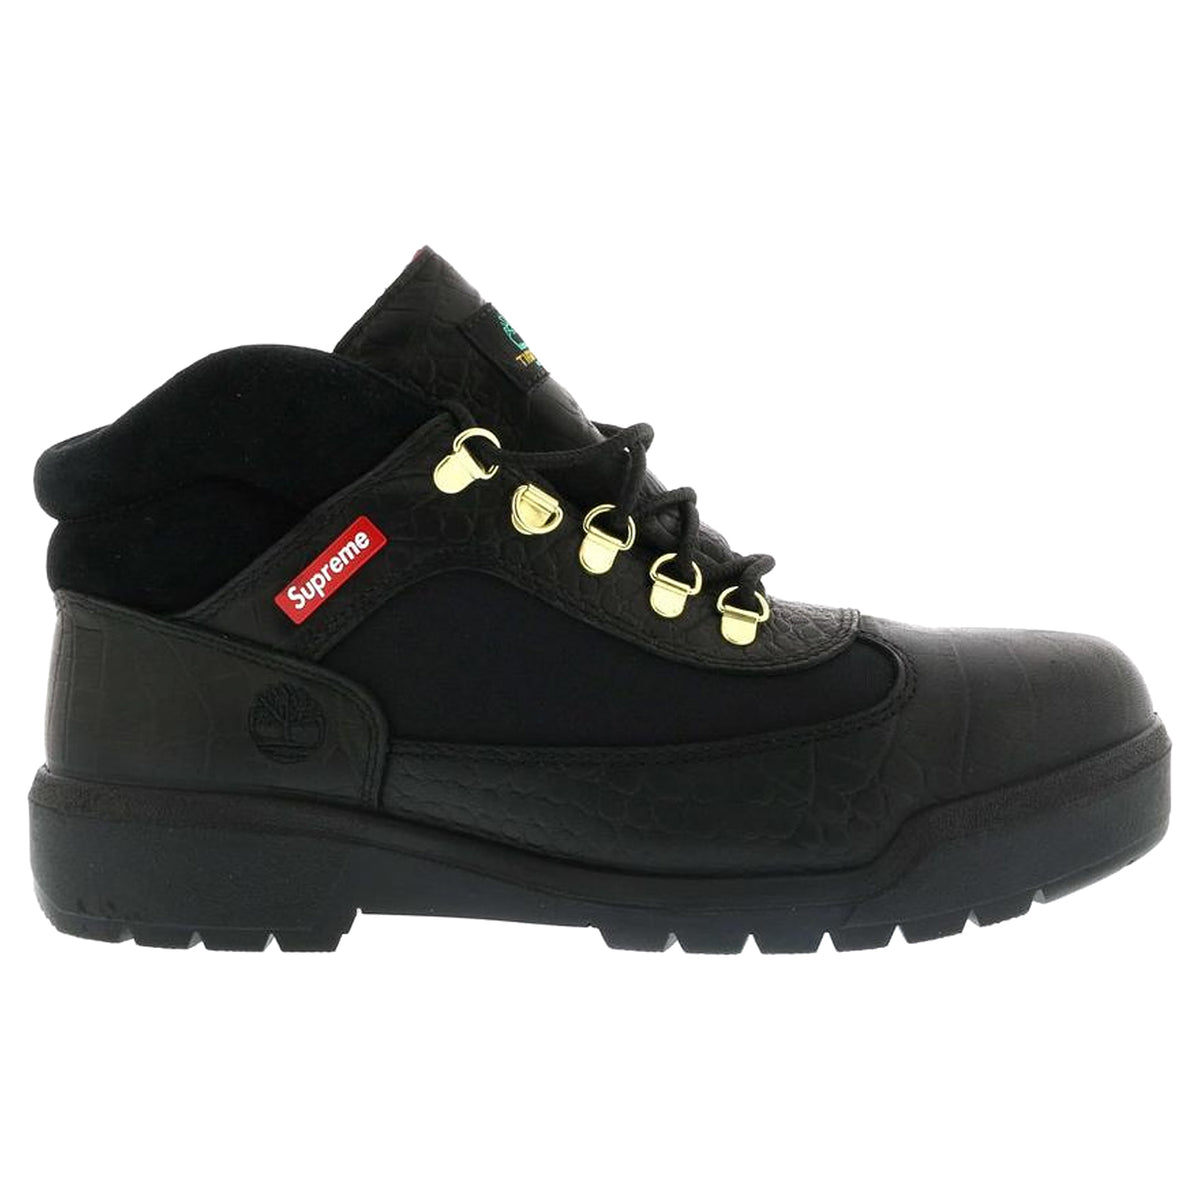 Timberland Field Boot Supreme Black - NY Tent Sale